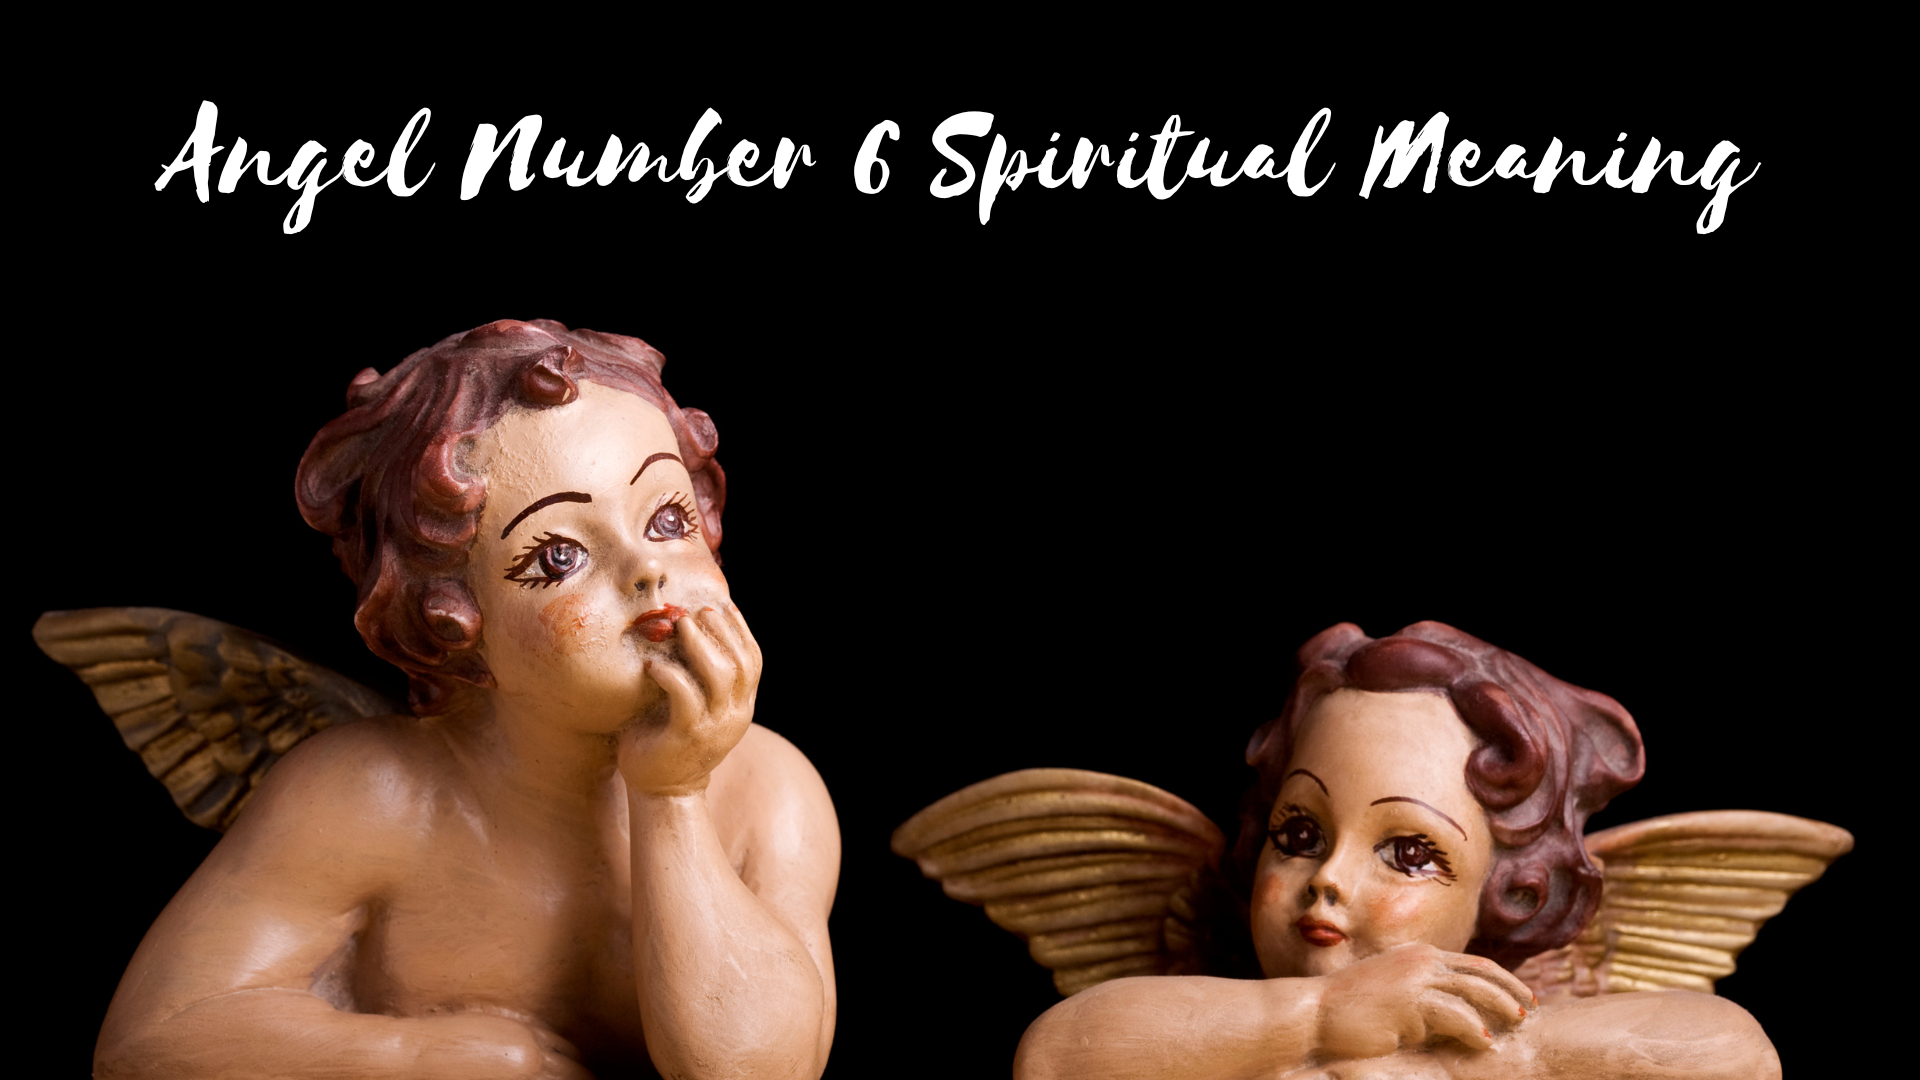 Two angel figurines with words Angel Number 6 Spiritual Meaning